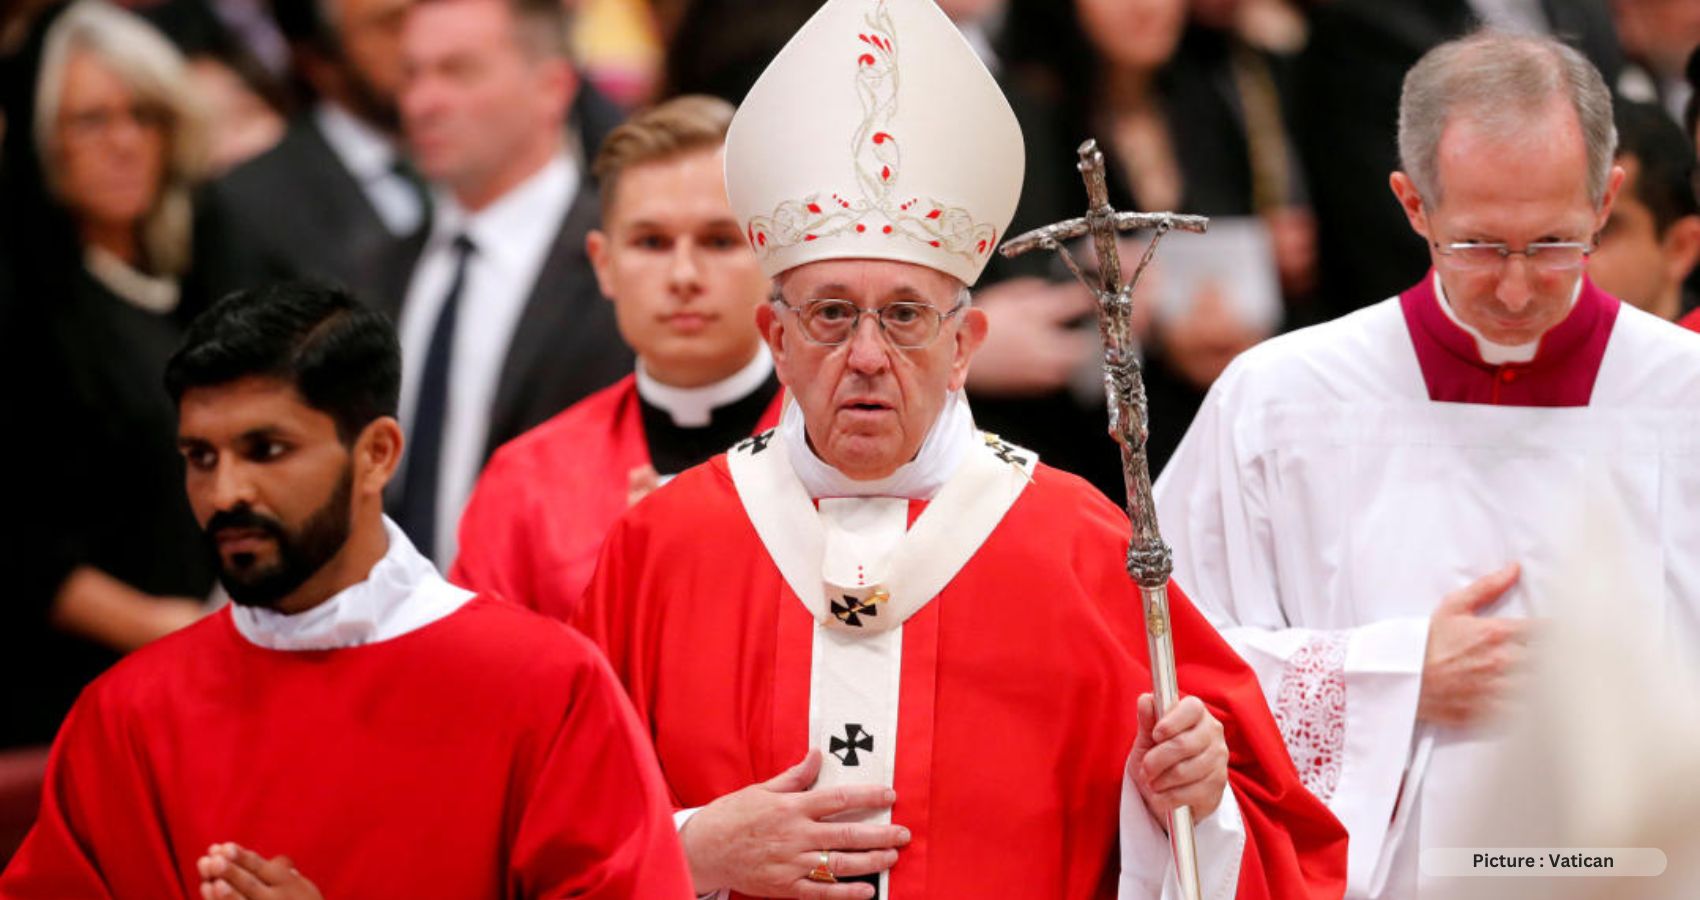 Pope Francis Names 21 New Cardinals, Showing Universality of the Church